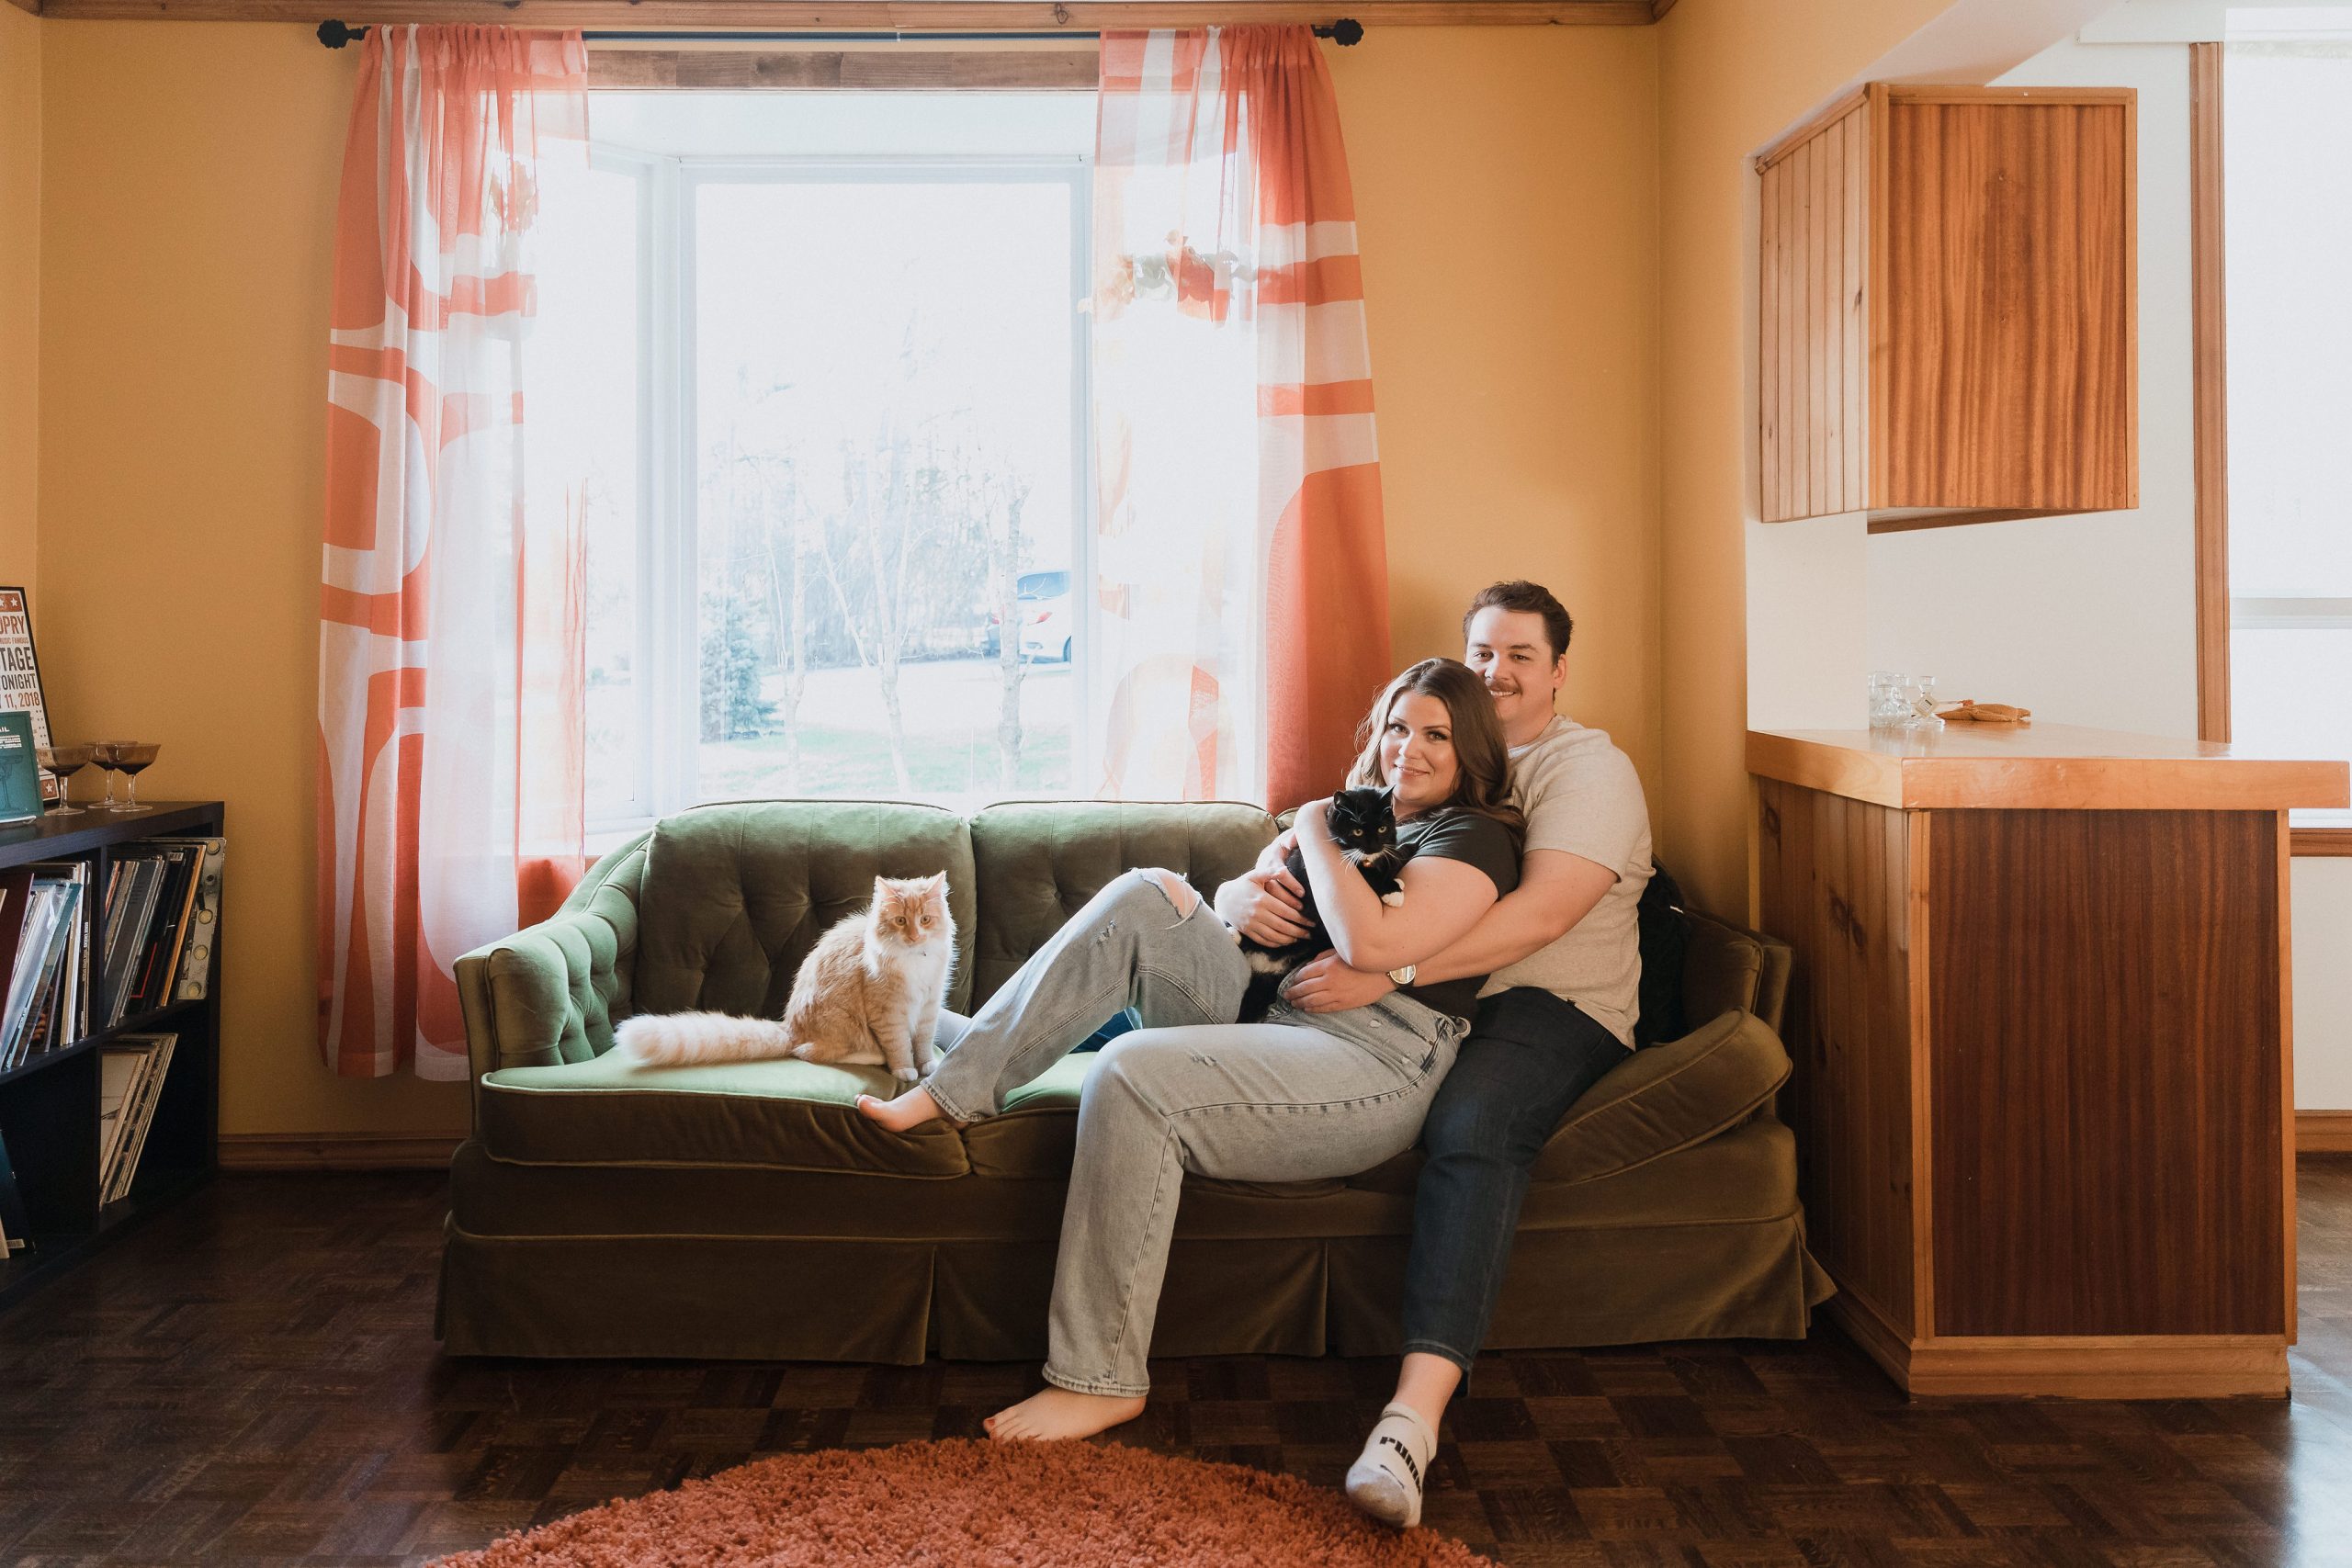 Couple sitting on the couch in orange living room retro style interiors in their home in rural Ontario, in-home engagement photos by Sonia V Photography